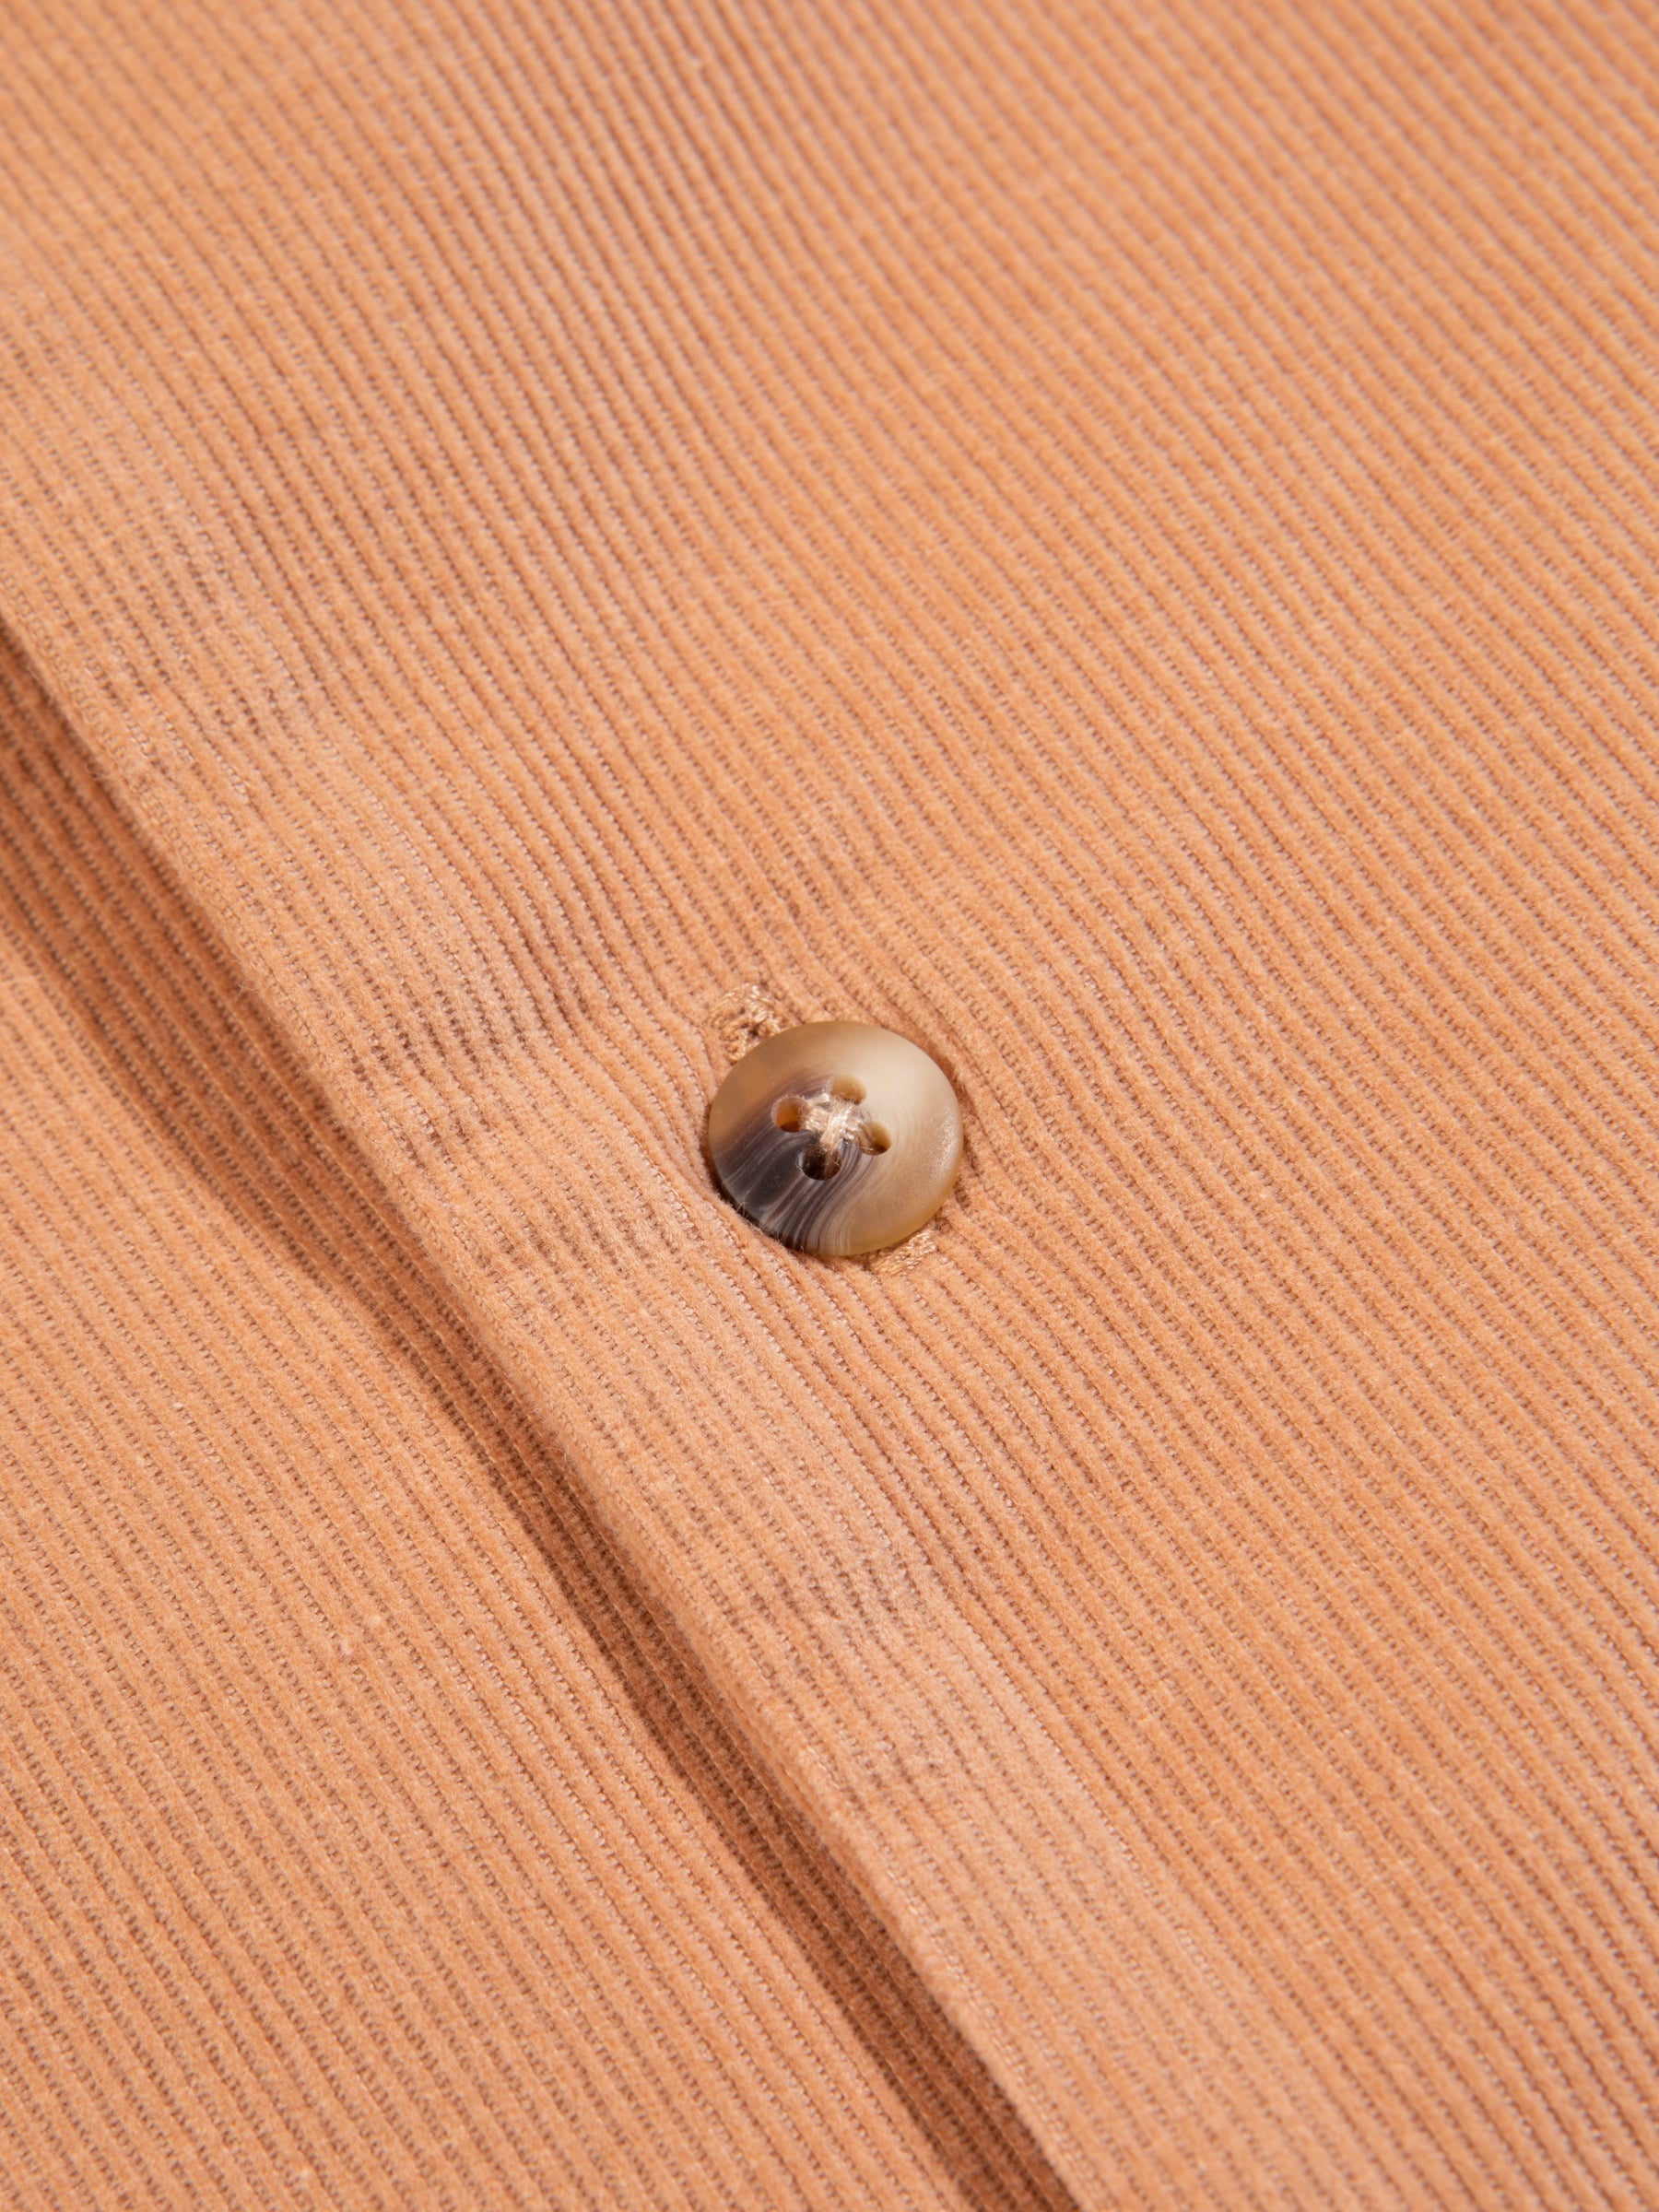 A close-up of the button on the KESTIN Tain Shirt in Organic Corduroy.